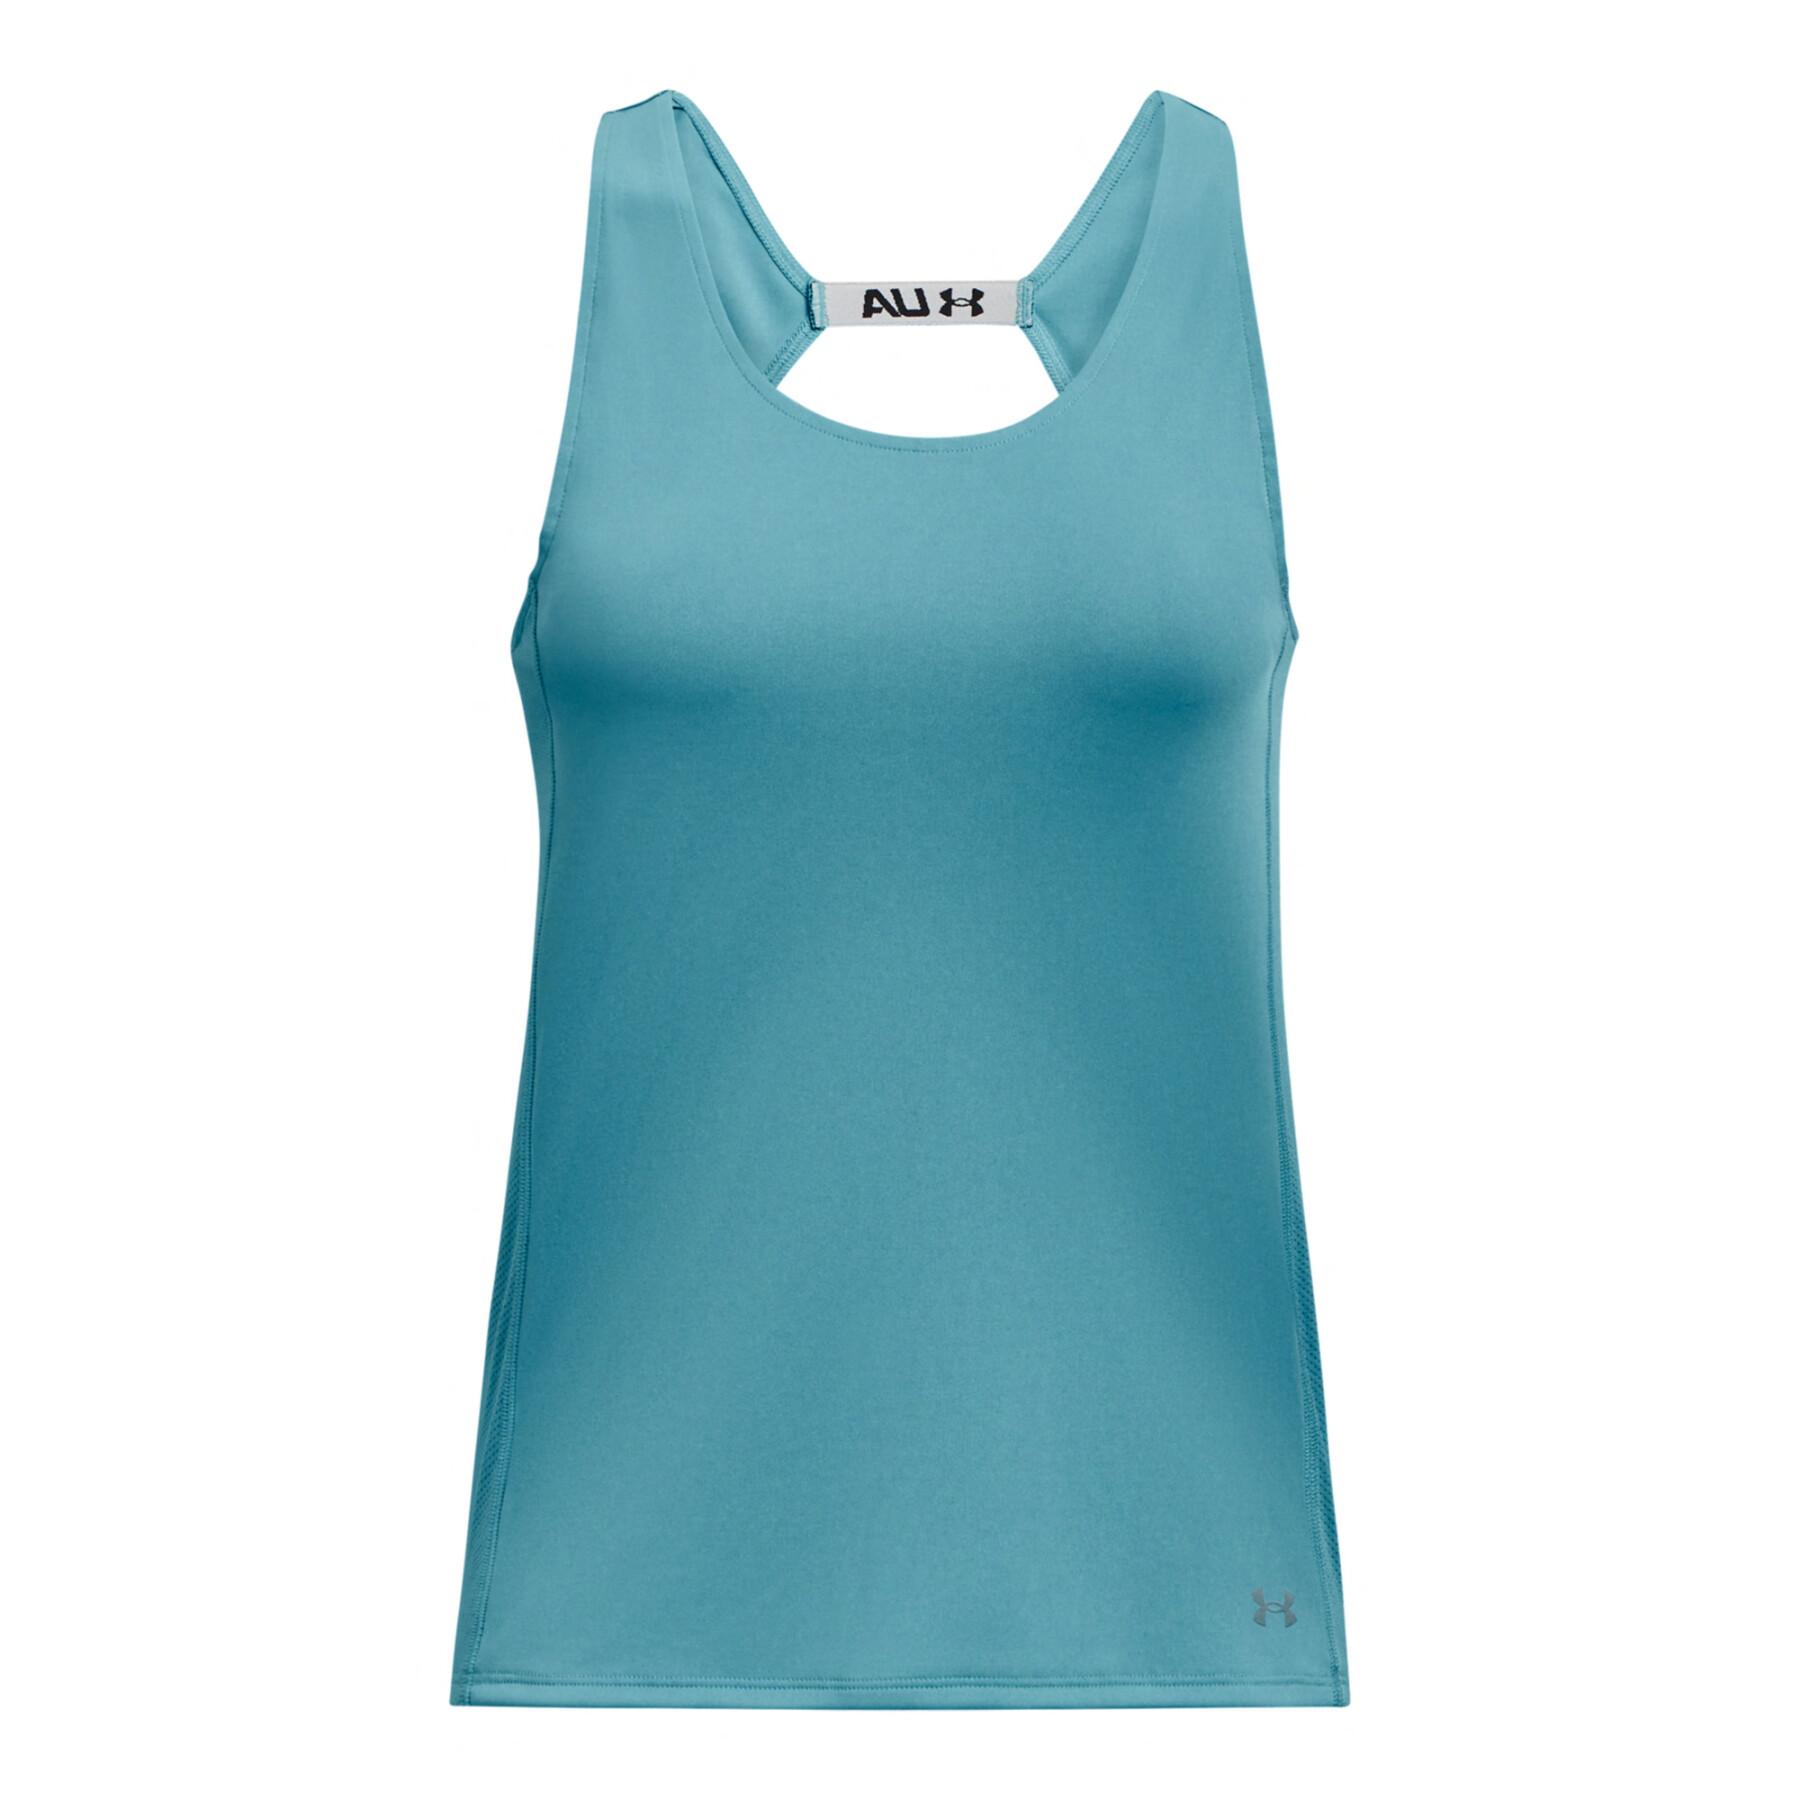 Tampo do tanque feminino Under Armour Fly-By